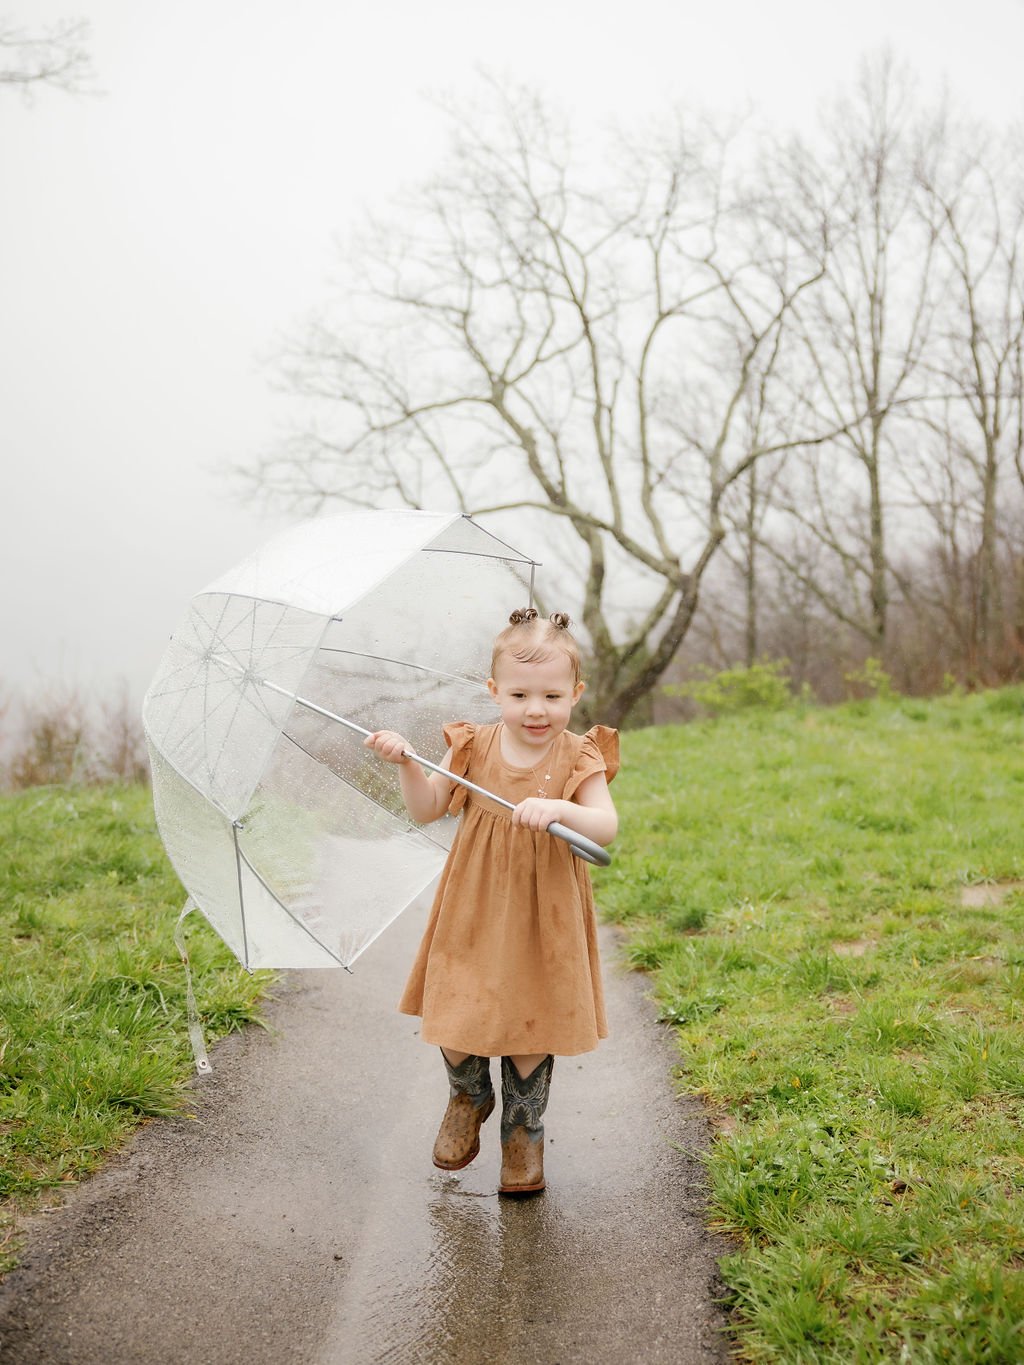 gatlinburg-family-photographer-tips-for-family-photos-with-a-toddler-child-holding-umbrella-playing